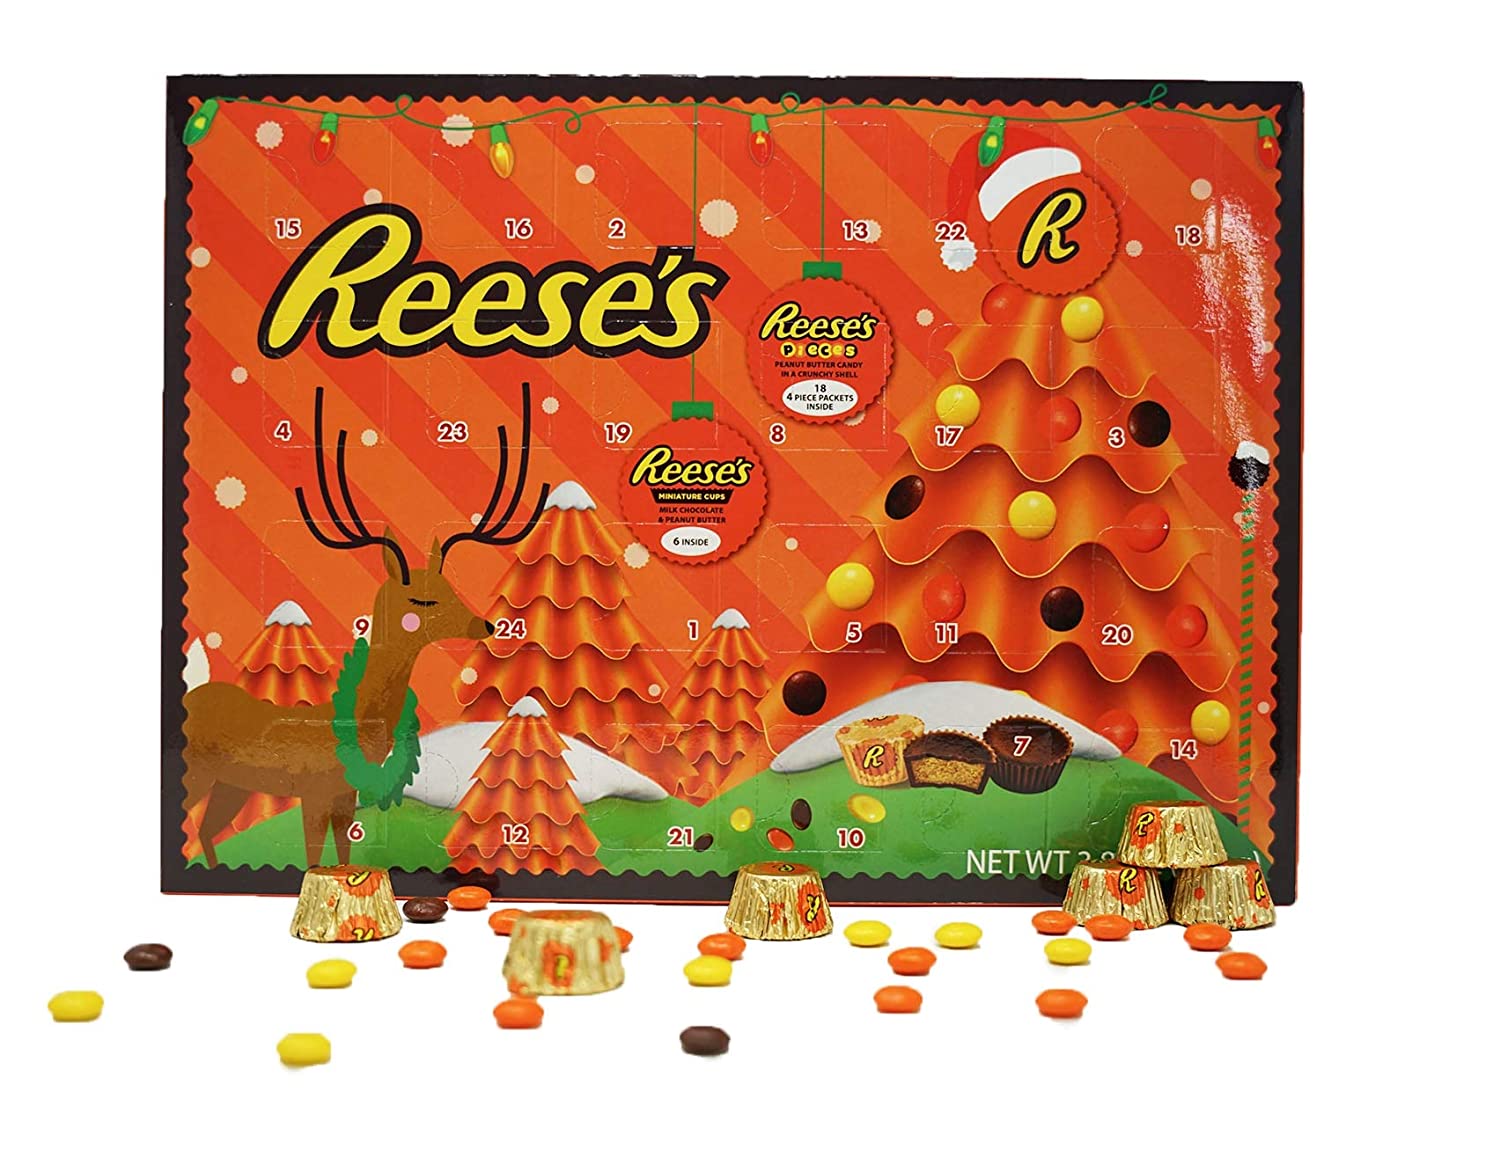 2022 Reese's Holiday Countdown Advent Calendar with Reese's Peanut Butter Cups and Candy Pieces, Pack Of 1 (1.76 Oz.) - image 1 of 3